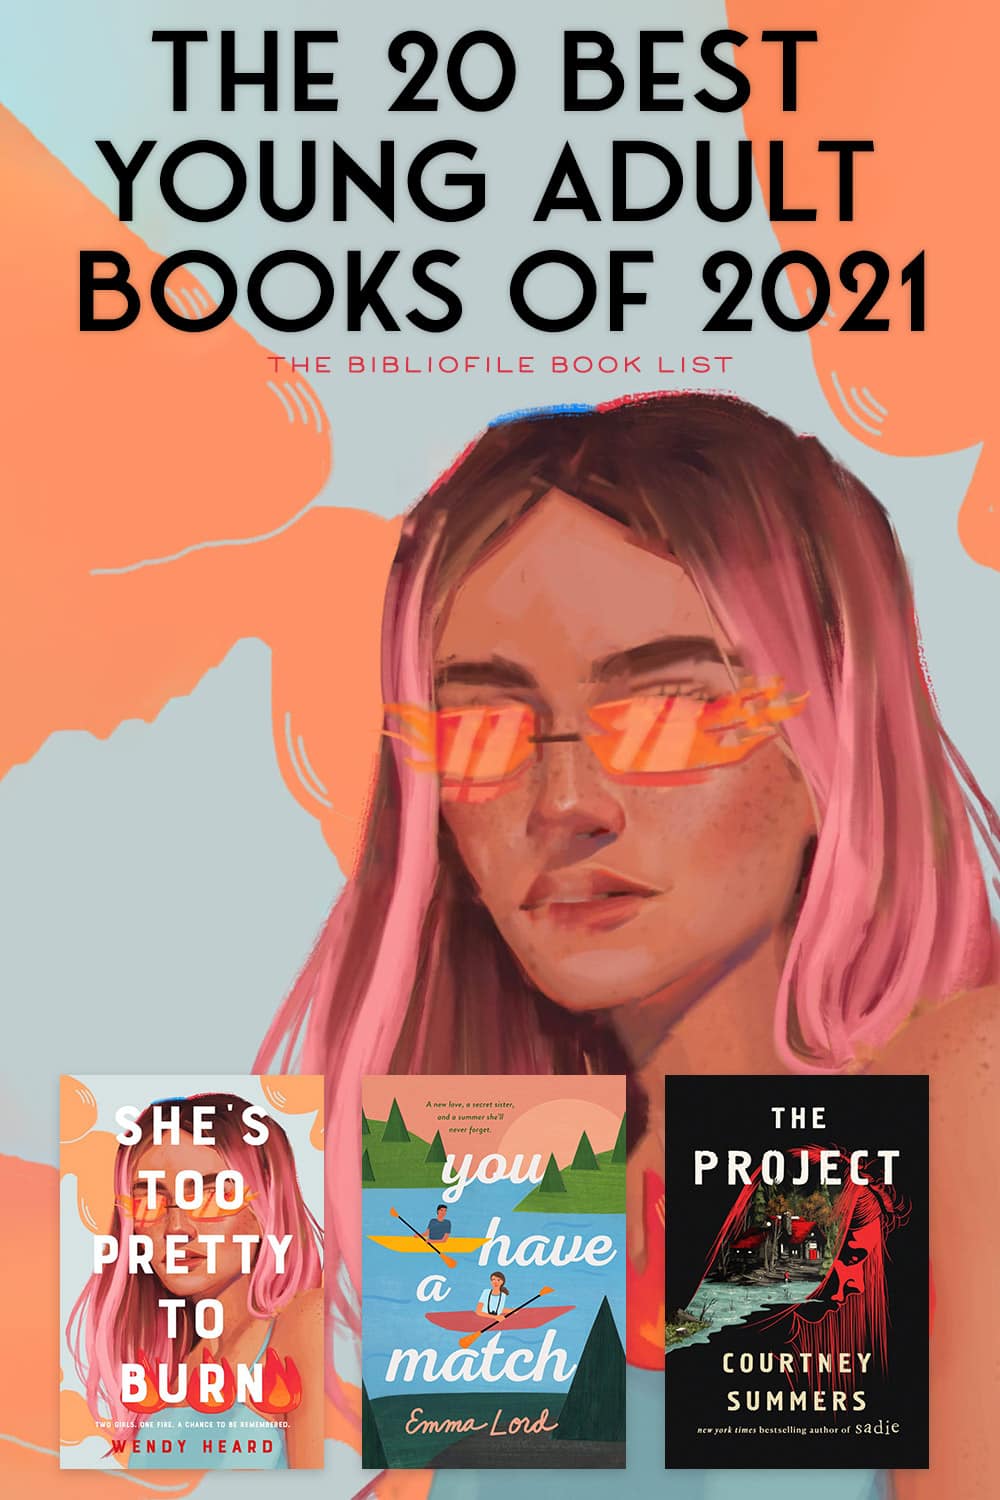 The Best Young Adult Books of 2021 (Anticipated) The Bibliofile